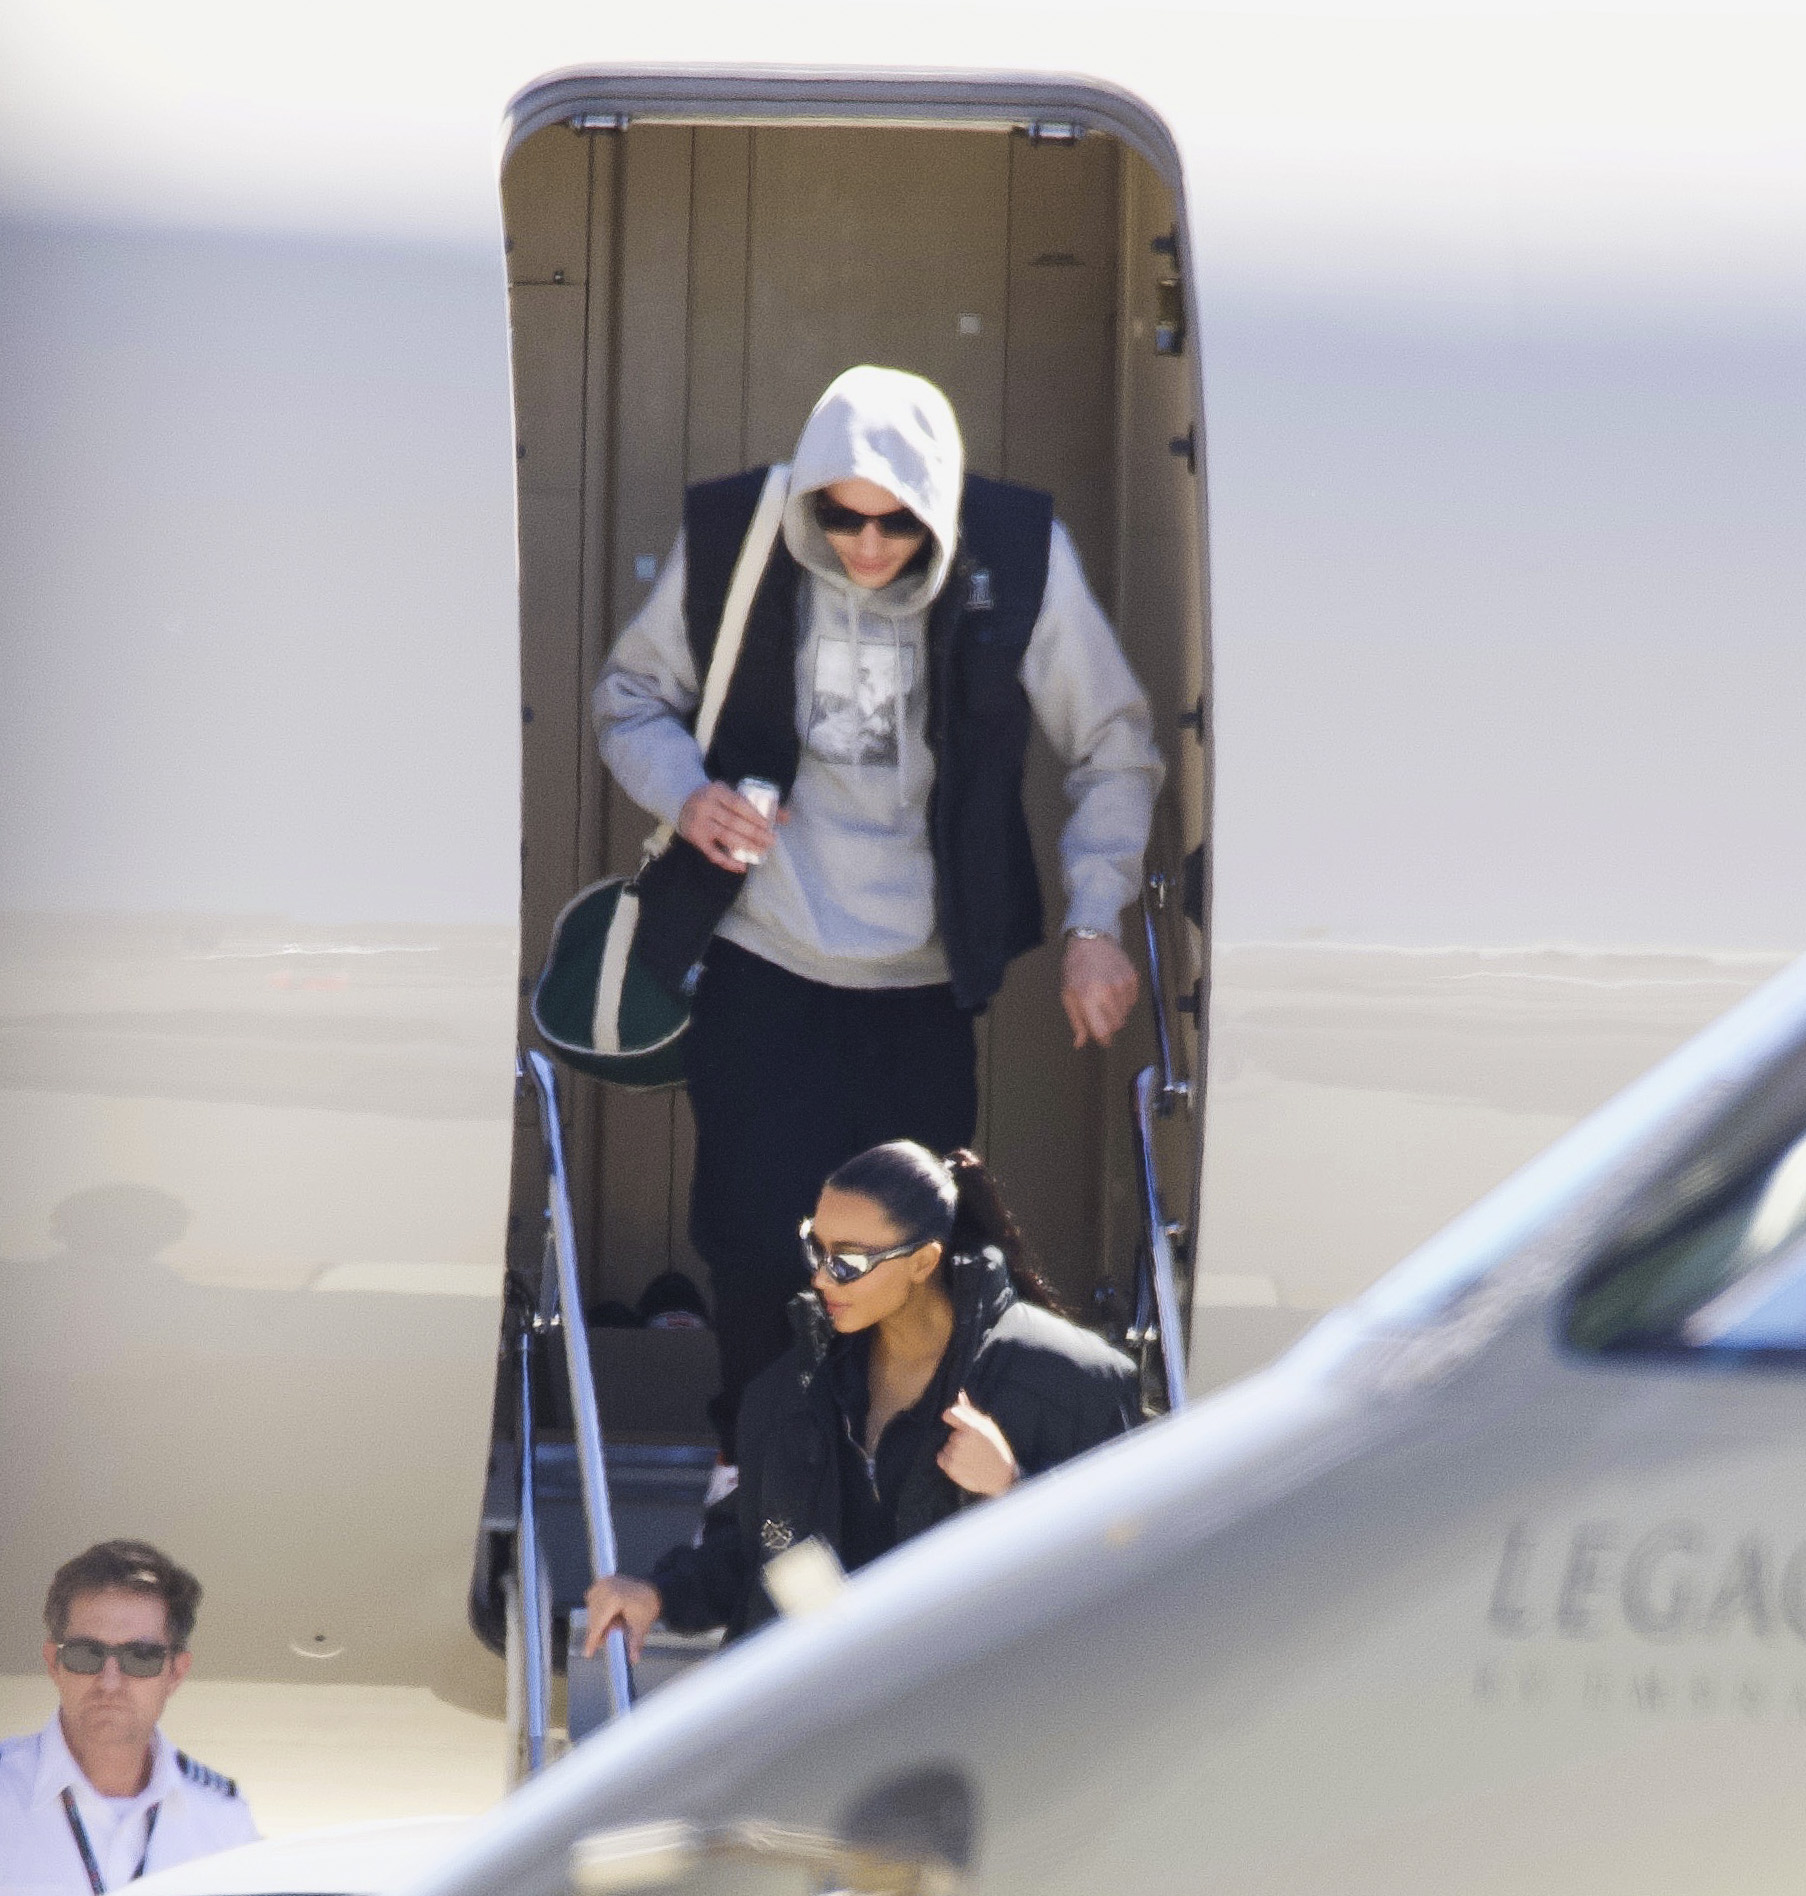 Kim Kardashian West and Pete Davidson step off a private jet in LA after a quick stop in NYC.